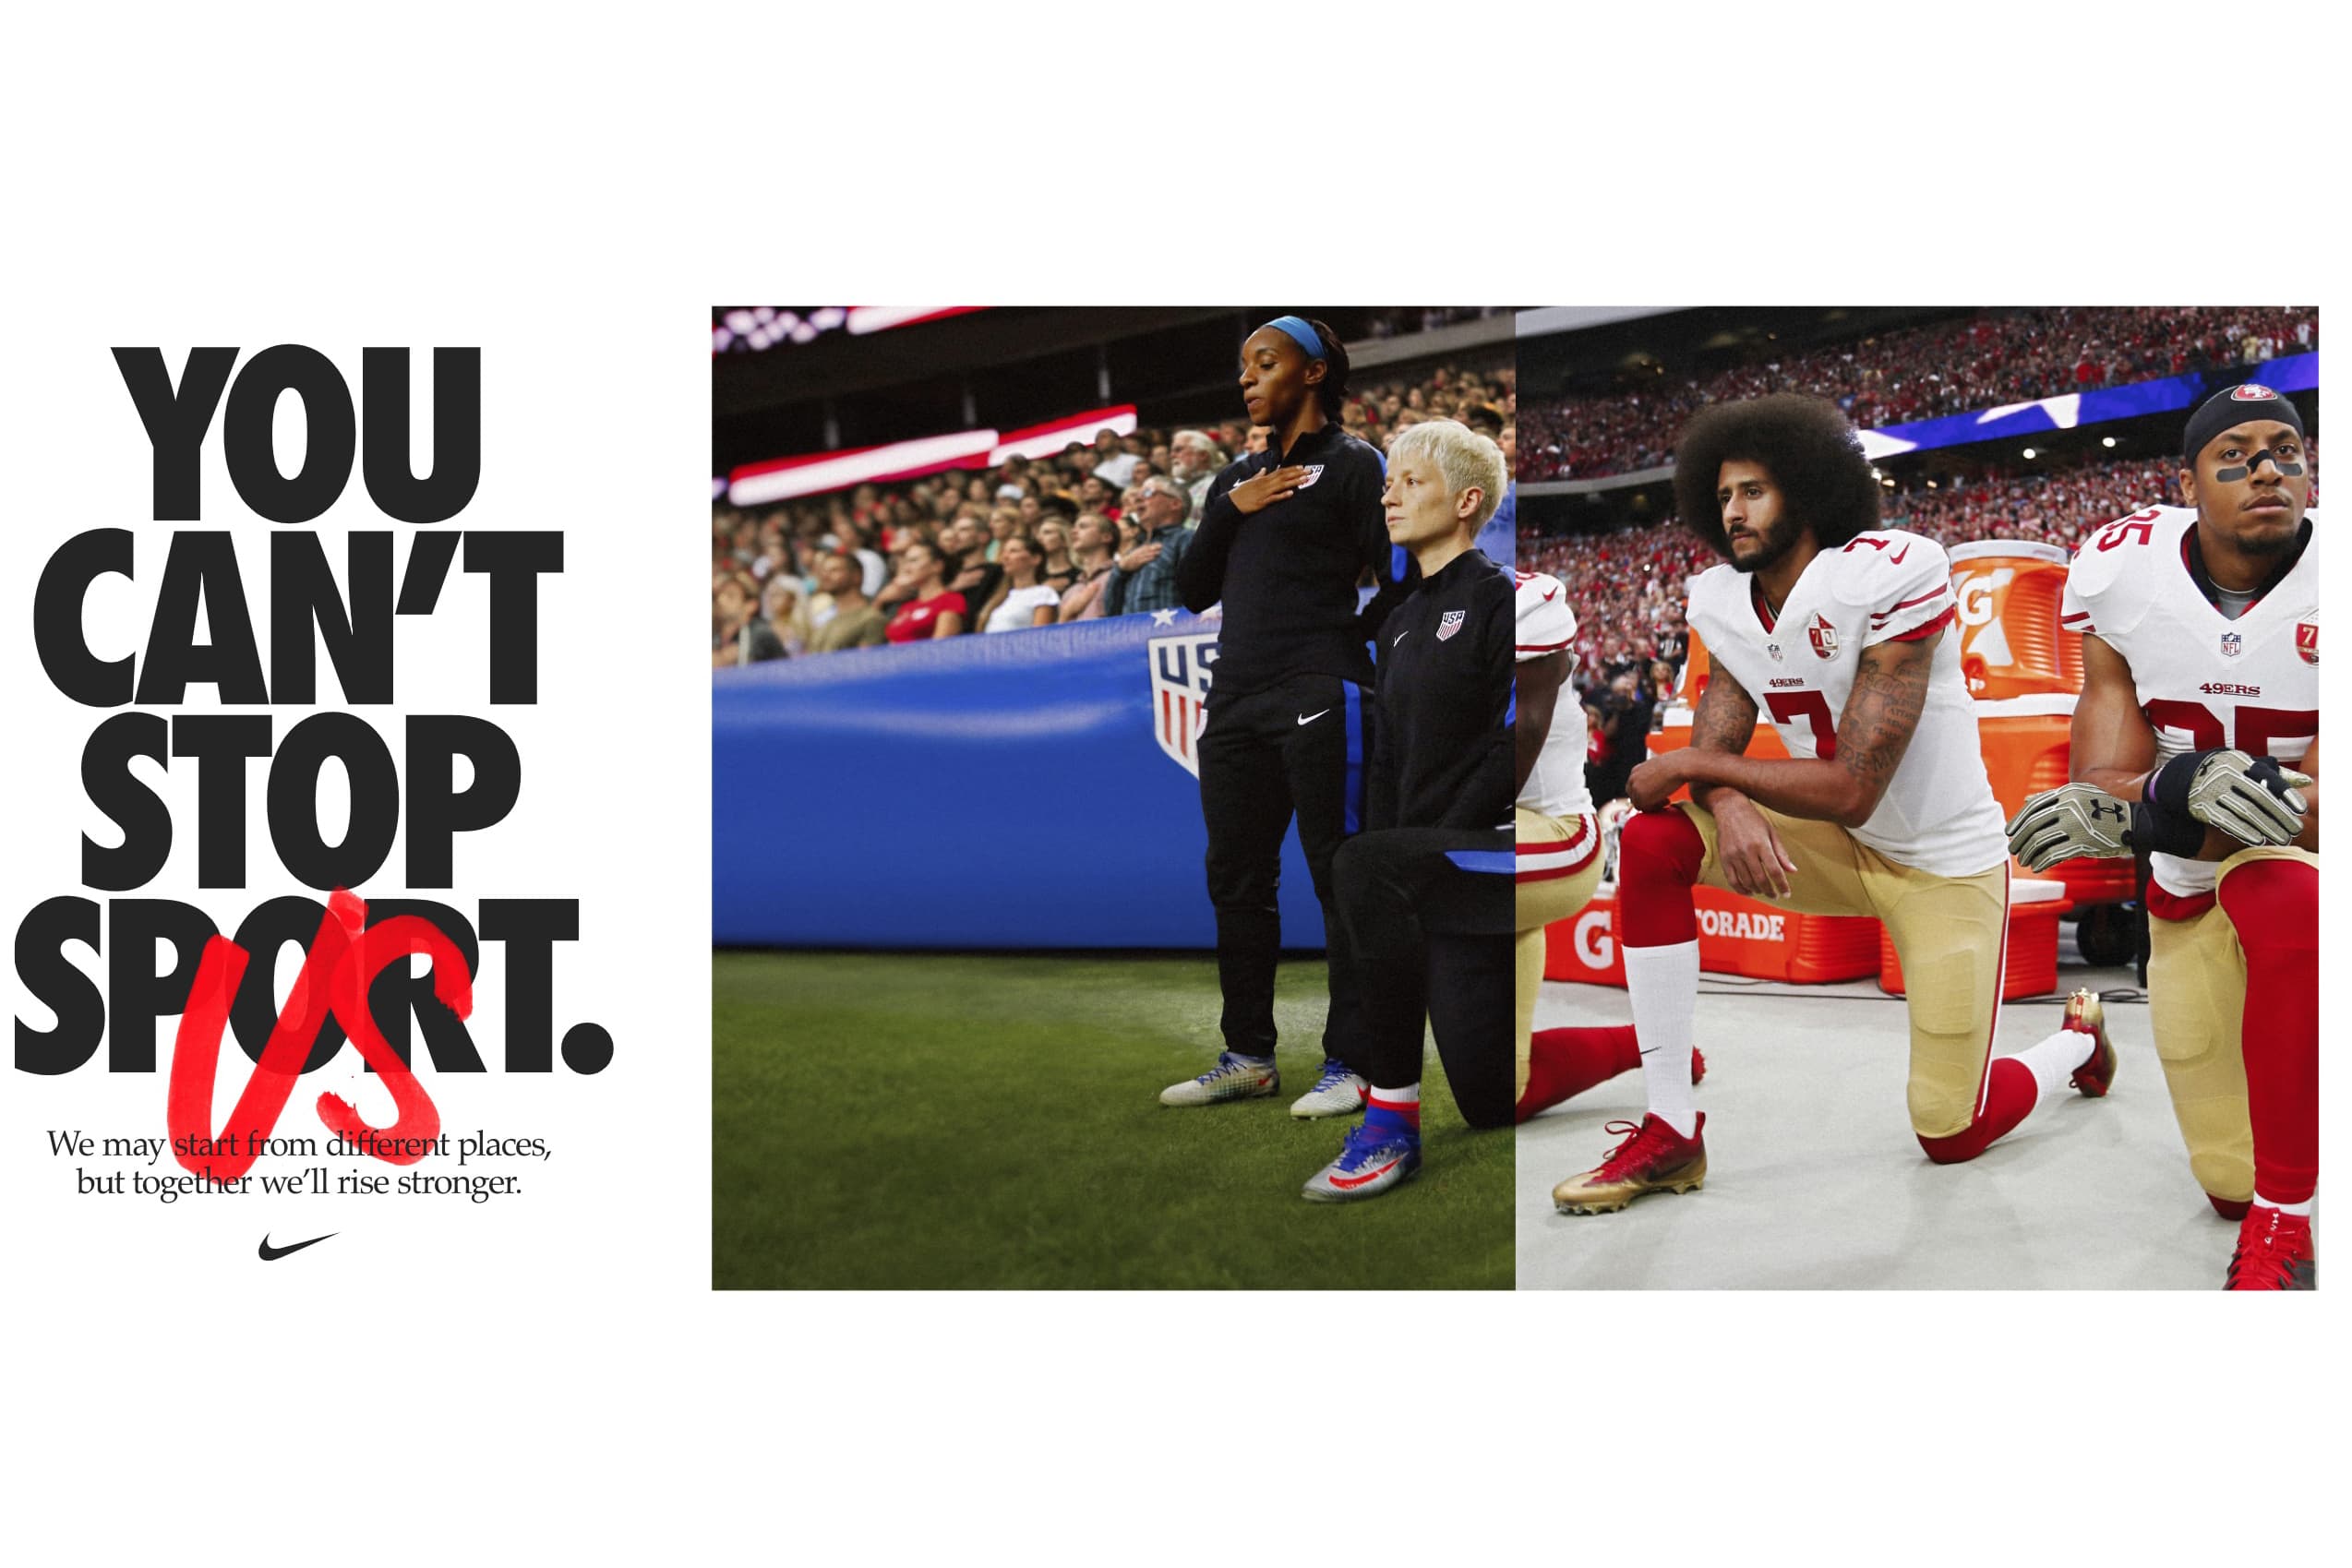 Máxima Viento fuerte Caducado Megan Rapinoe speaks out about race and change, in Nike campaign